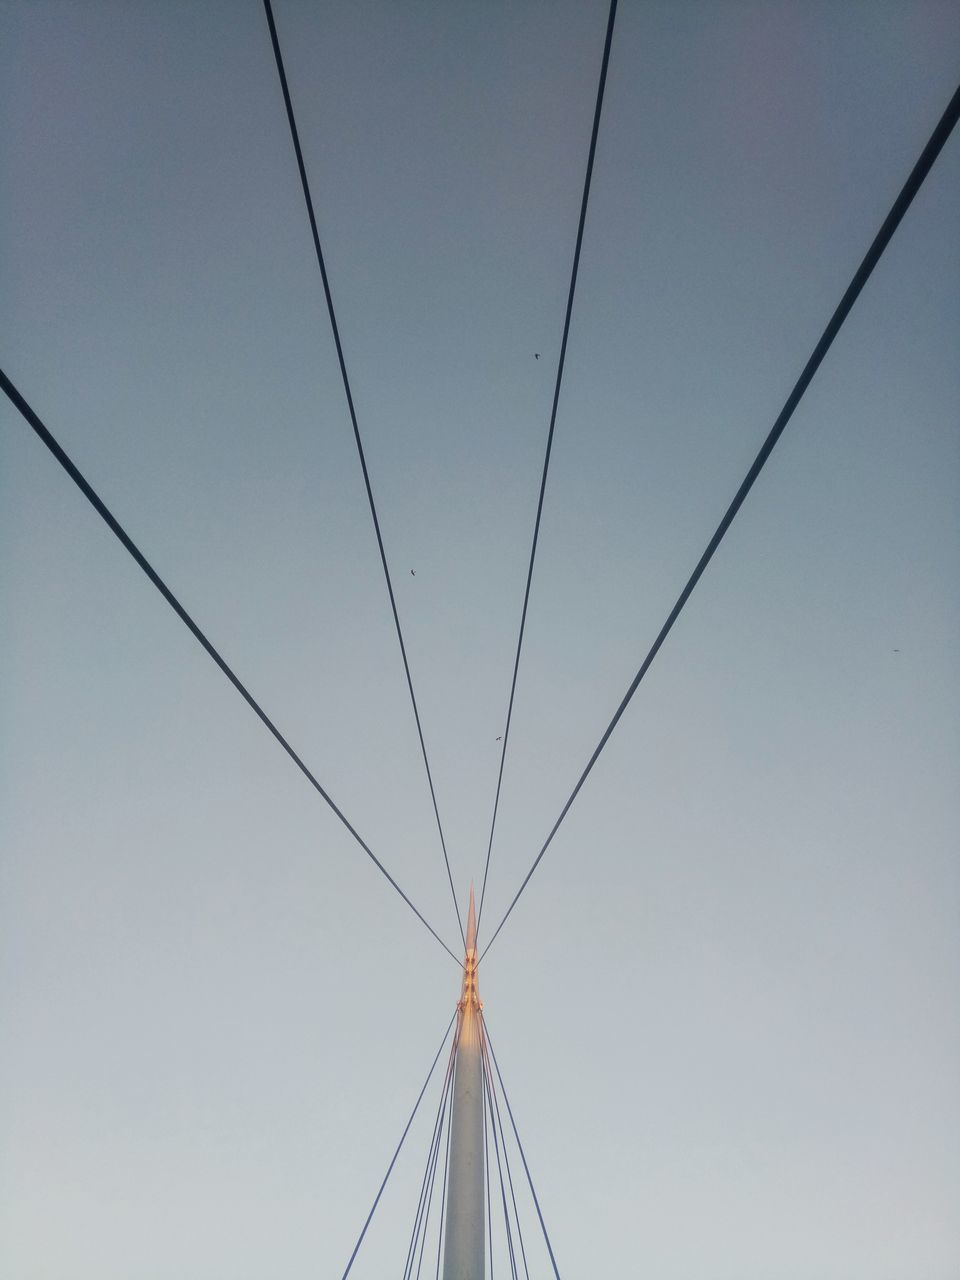 sky, no people, cable, low angle view, connection, clear sky, nature, day, built structure, architecture, technology, outdoors, transportation, copy space, electricity, fuel and power generation, power line, power supply, blue, mode of transportation, directly below